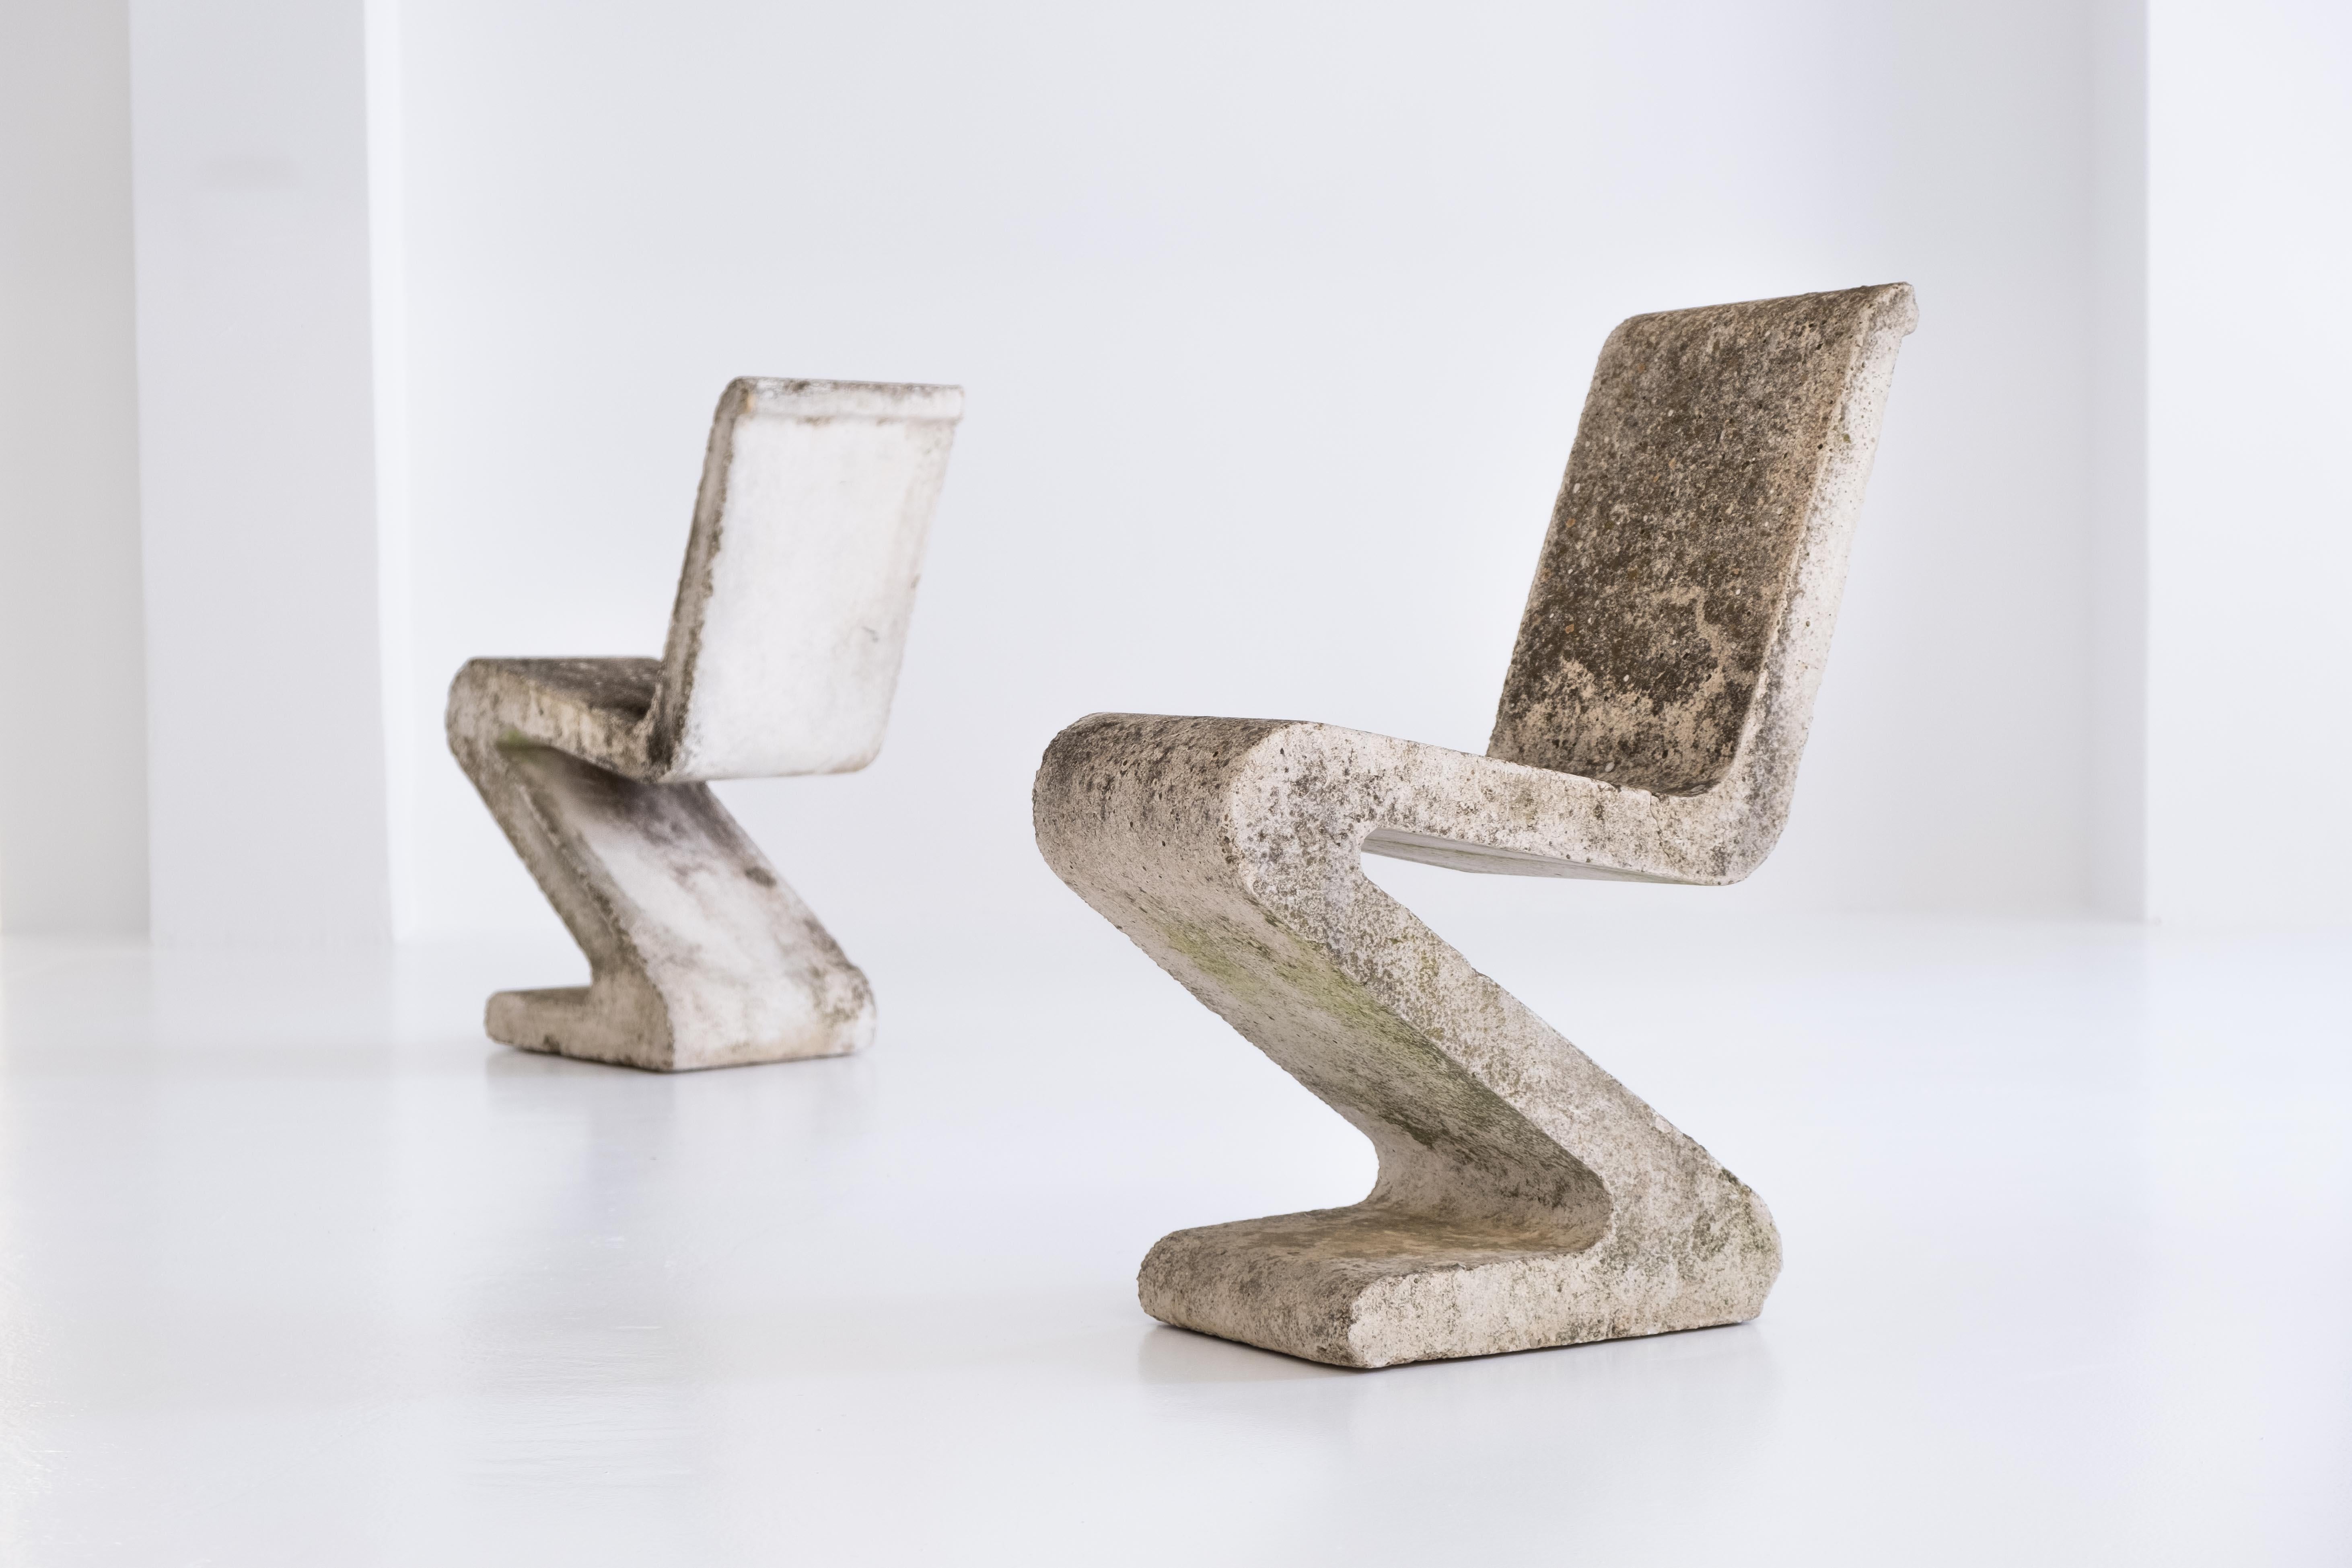 French Brutalist Pair of Concrete Zig Zag Chairs, France, ca. 1970s